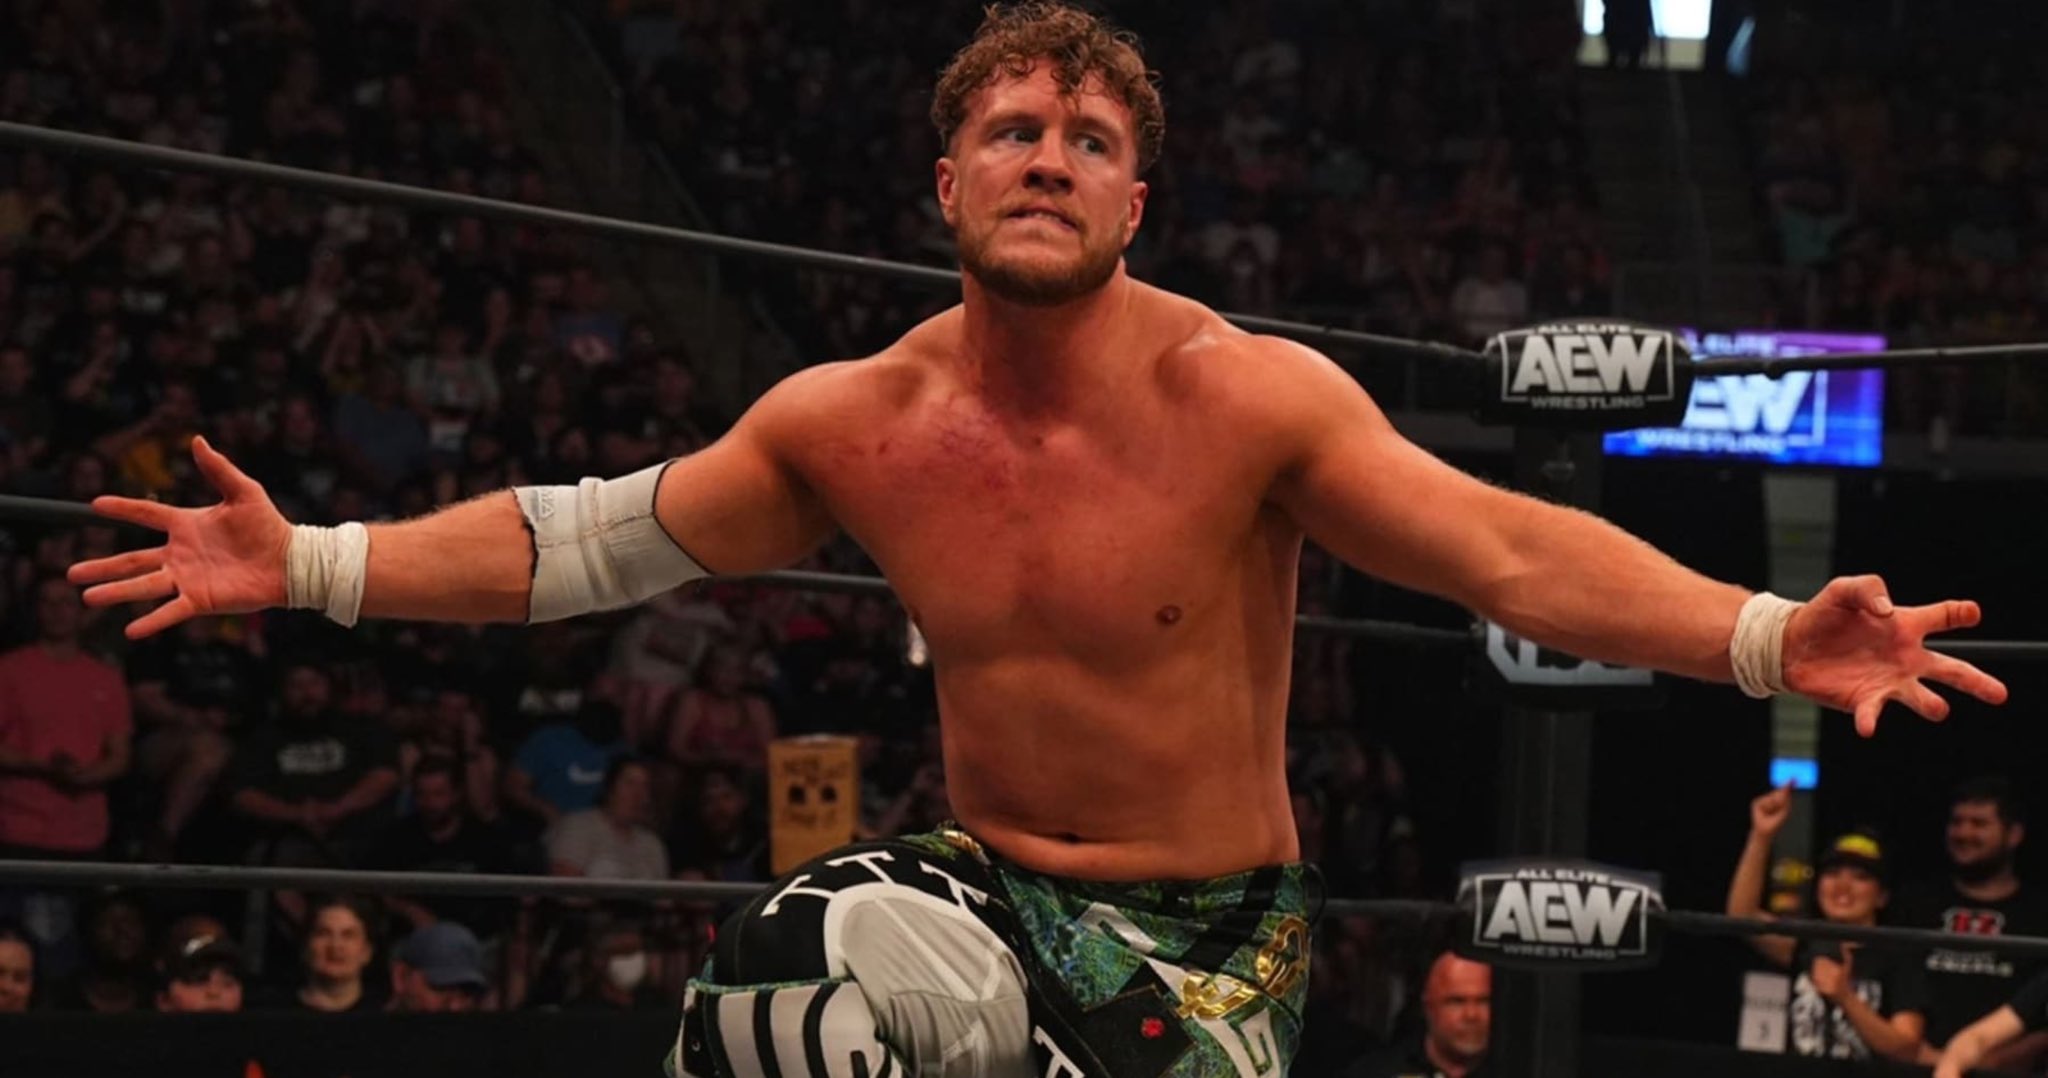 Elevating: The Risks and Rewards of AEW Pushing Will Ospreay to